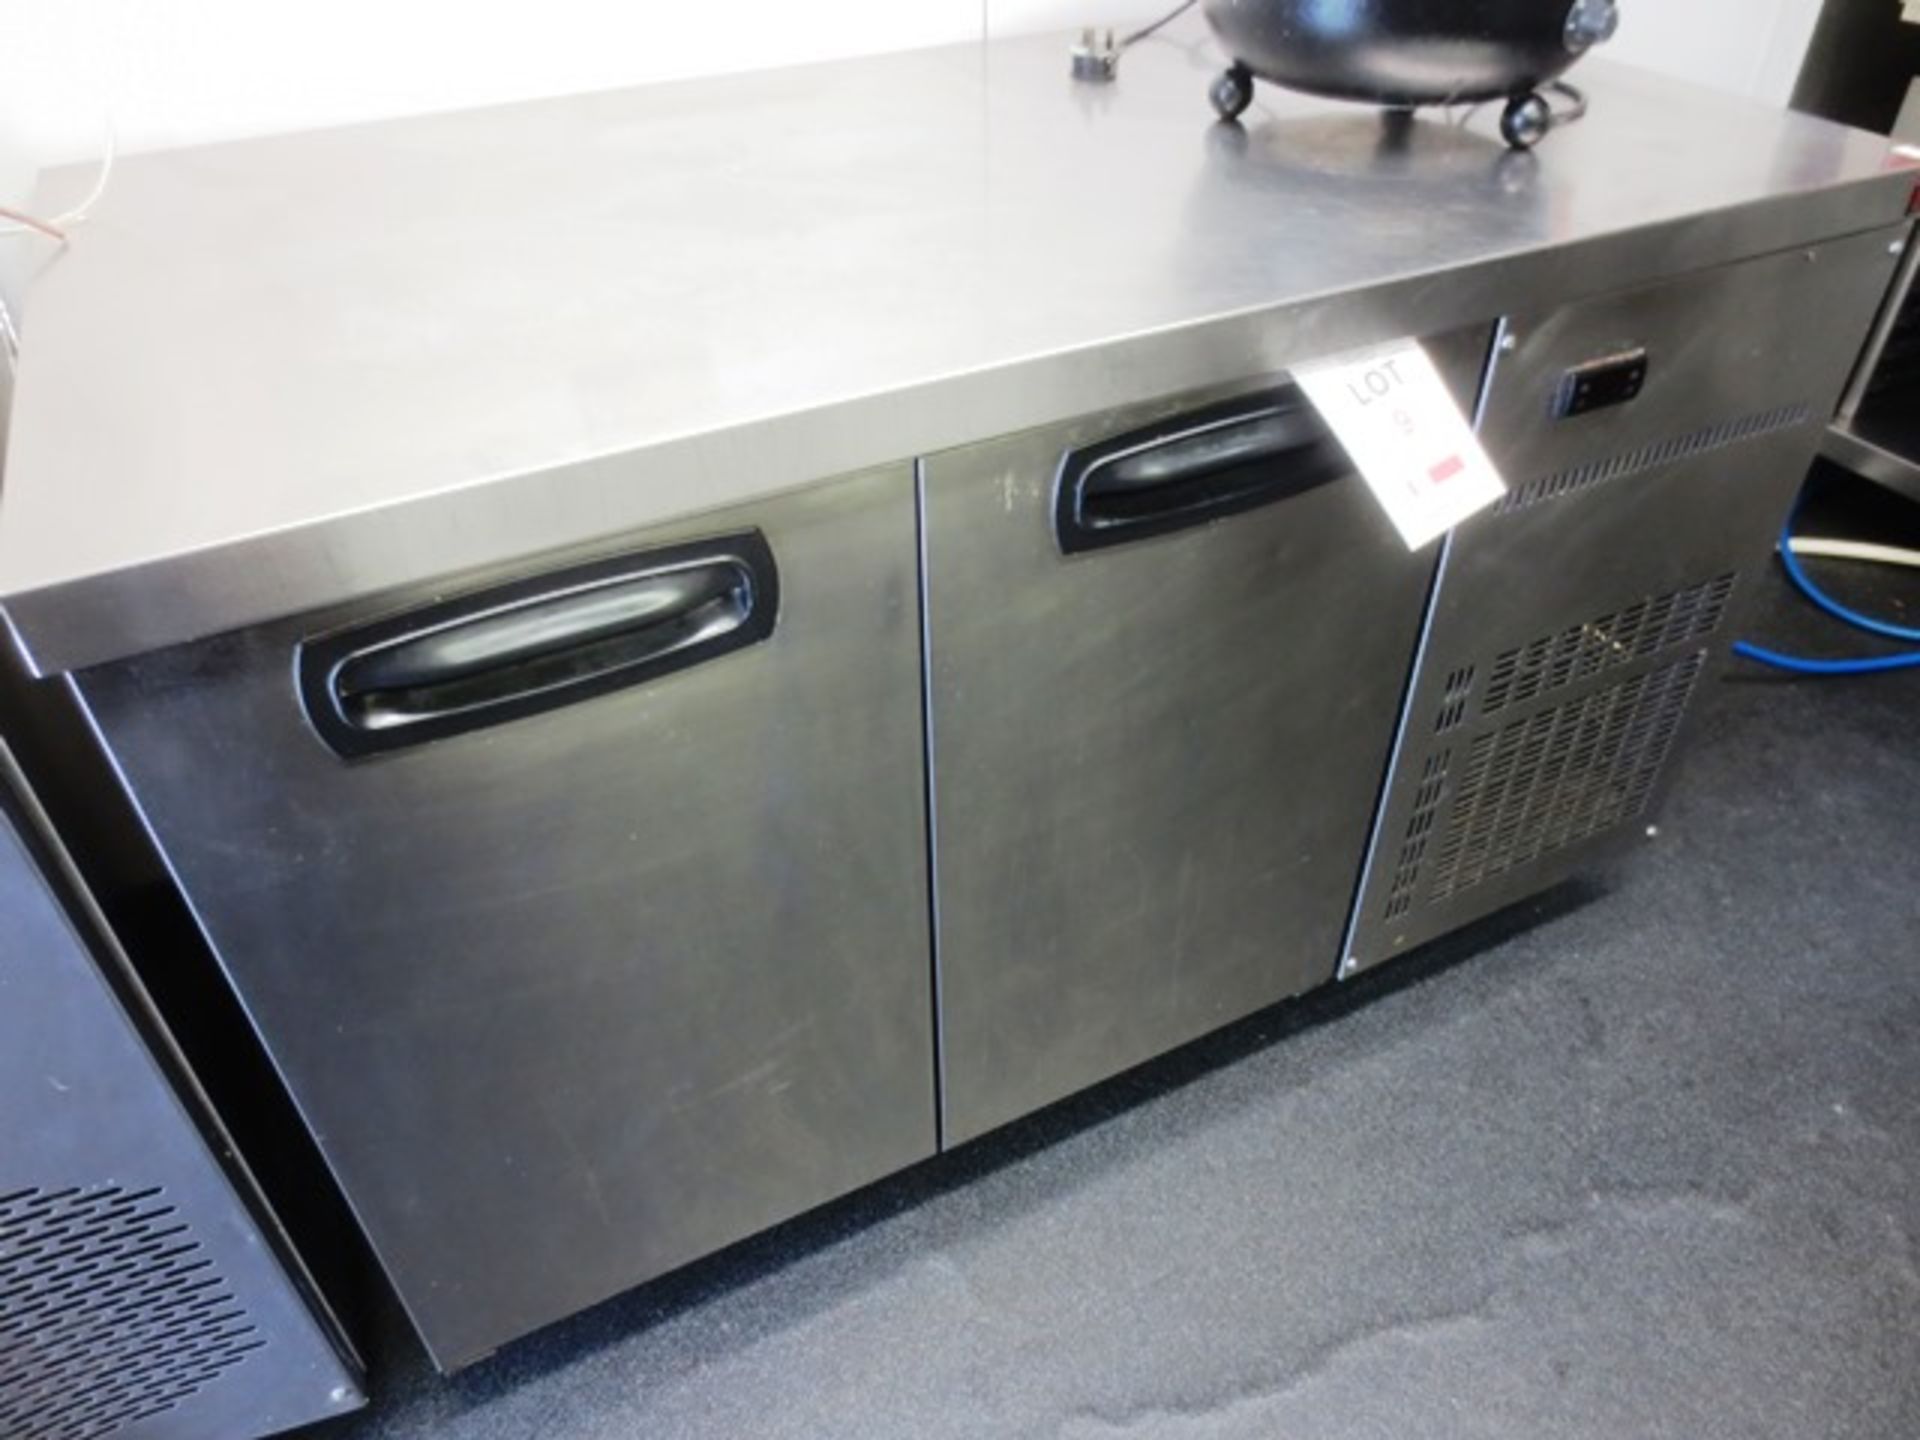 Stainless steel double door refridgerated counter unit (240v), approx dimensions: 1350 x 700mm